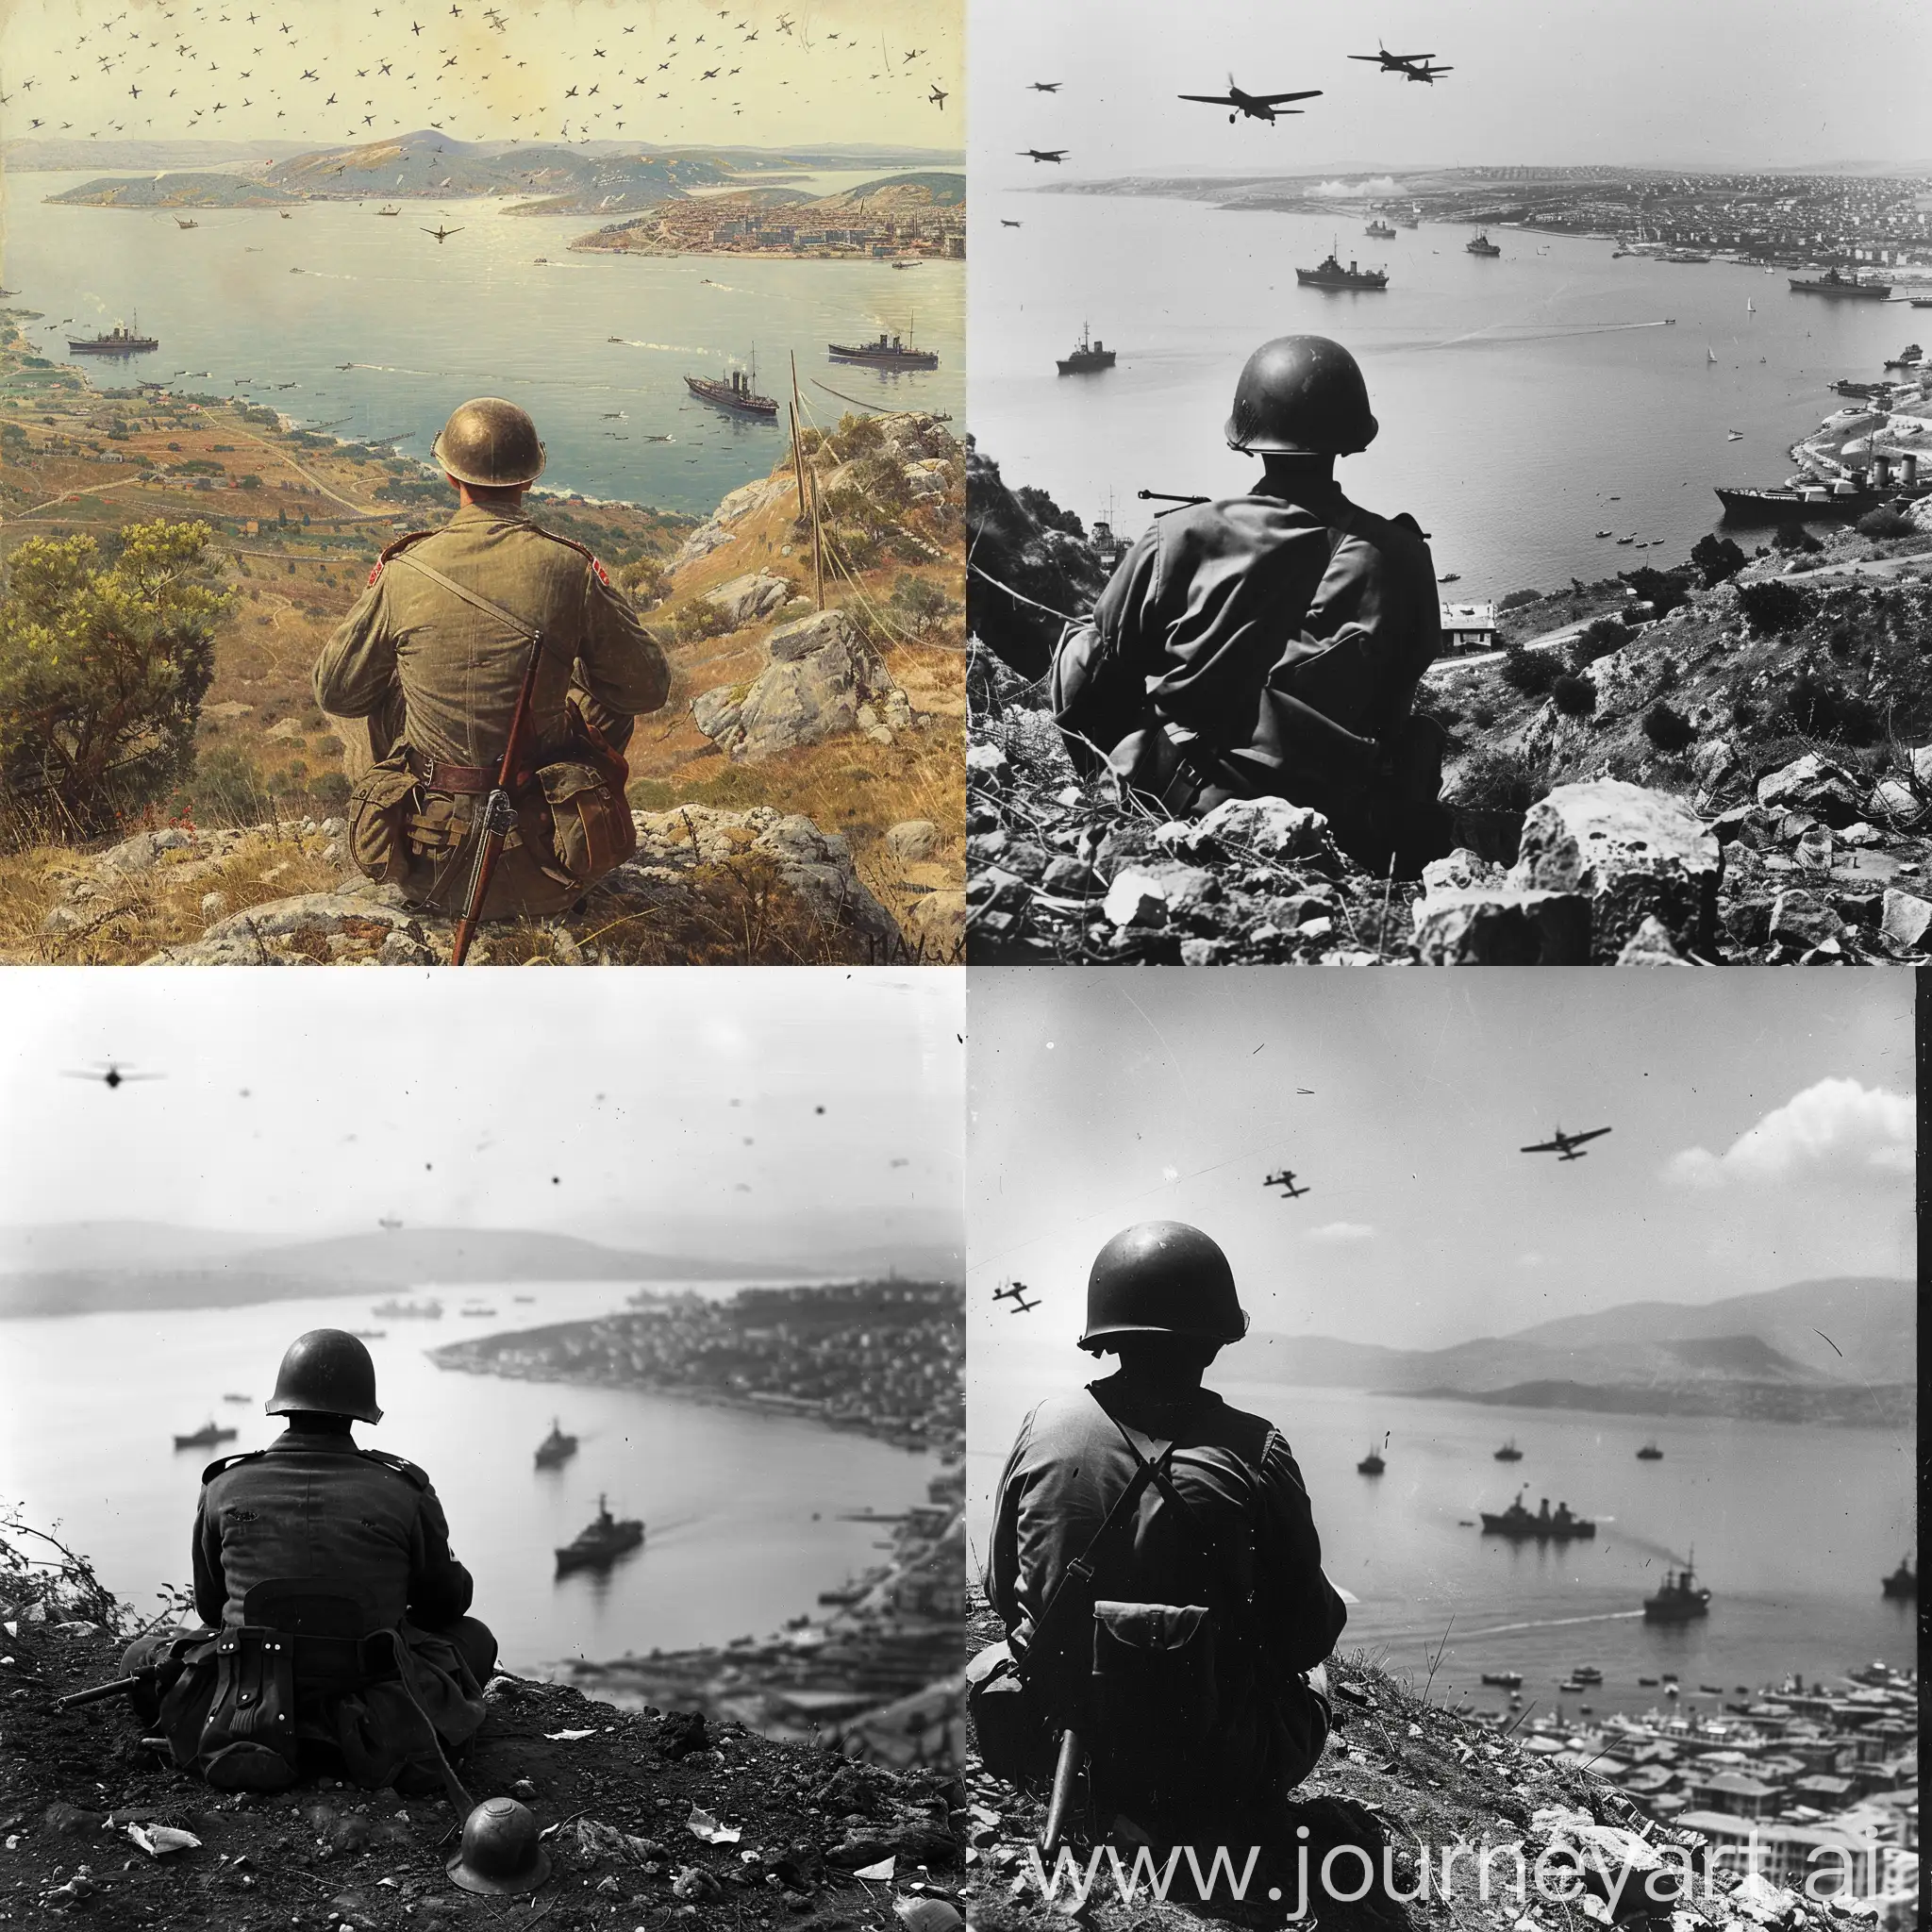 The Canakkale soldier watches the enemy ships and planes coming from the opposite shore, alone from the hill.